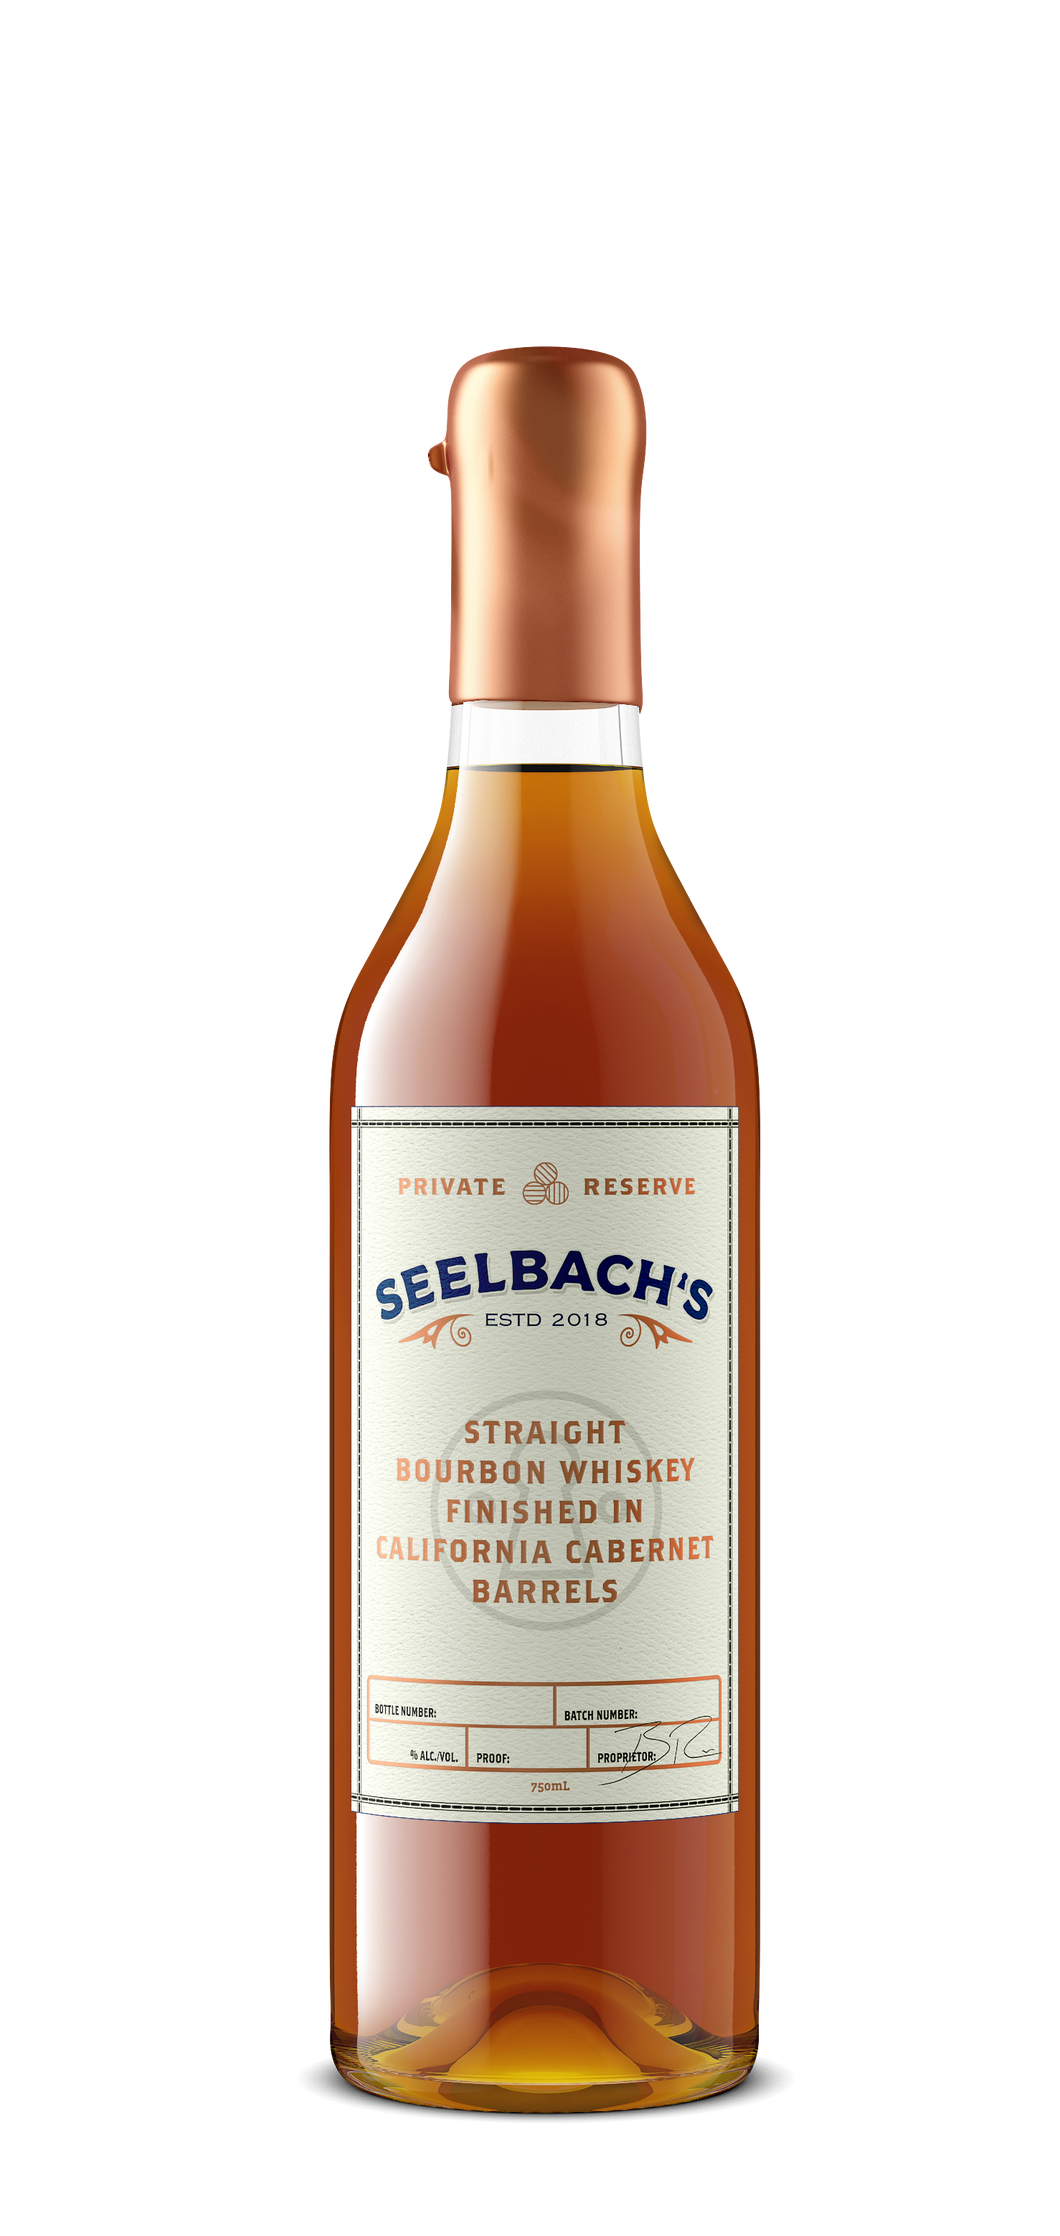 Seelbach's Private Reserve California Cab Finished Bourbon 130.1 Proof